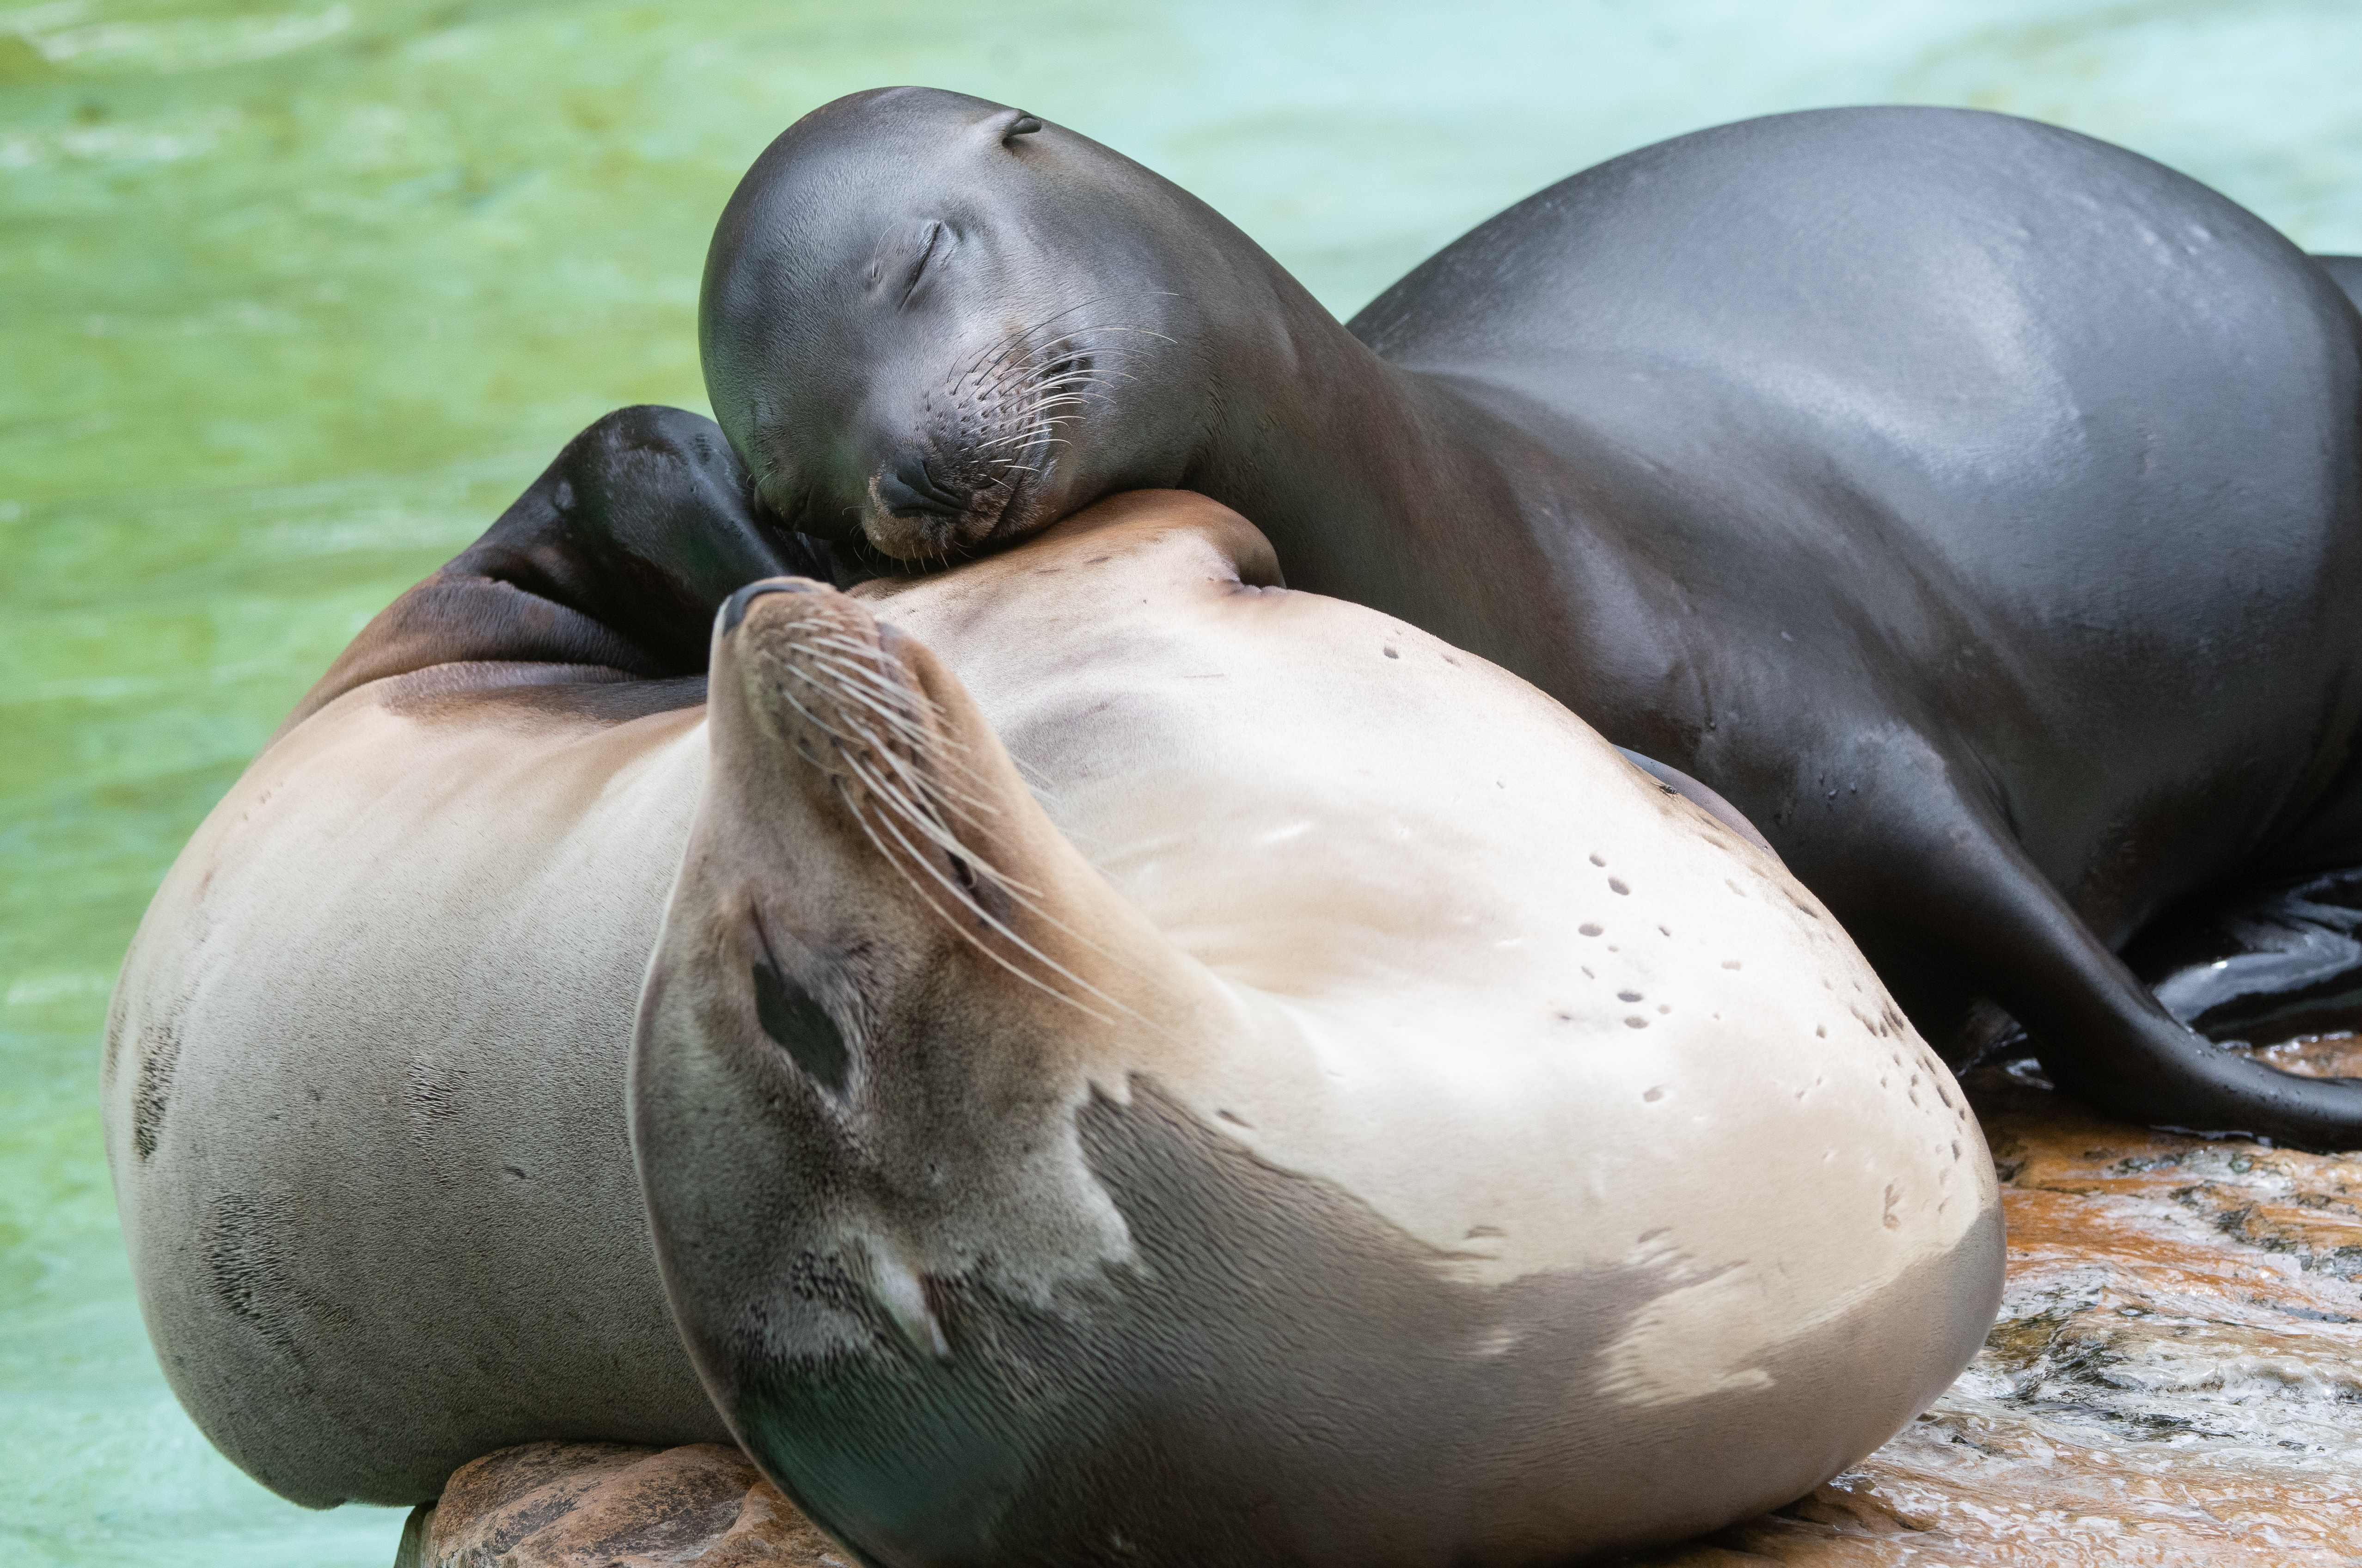 California sea lions take a nap in their enclosure at the Zoologischer Garten Berlin on May 12, 2018.